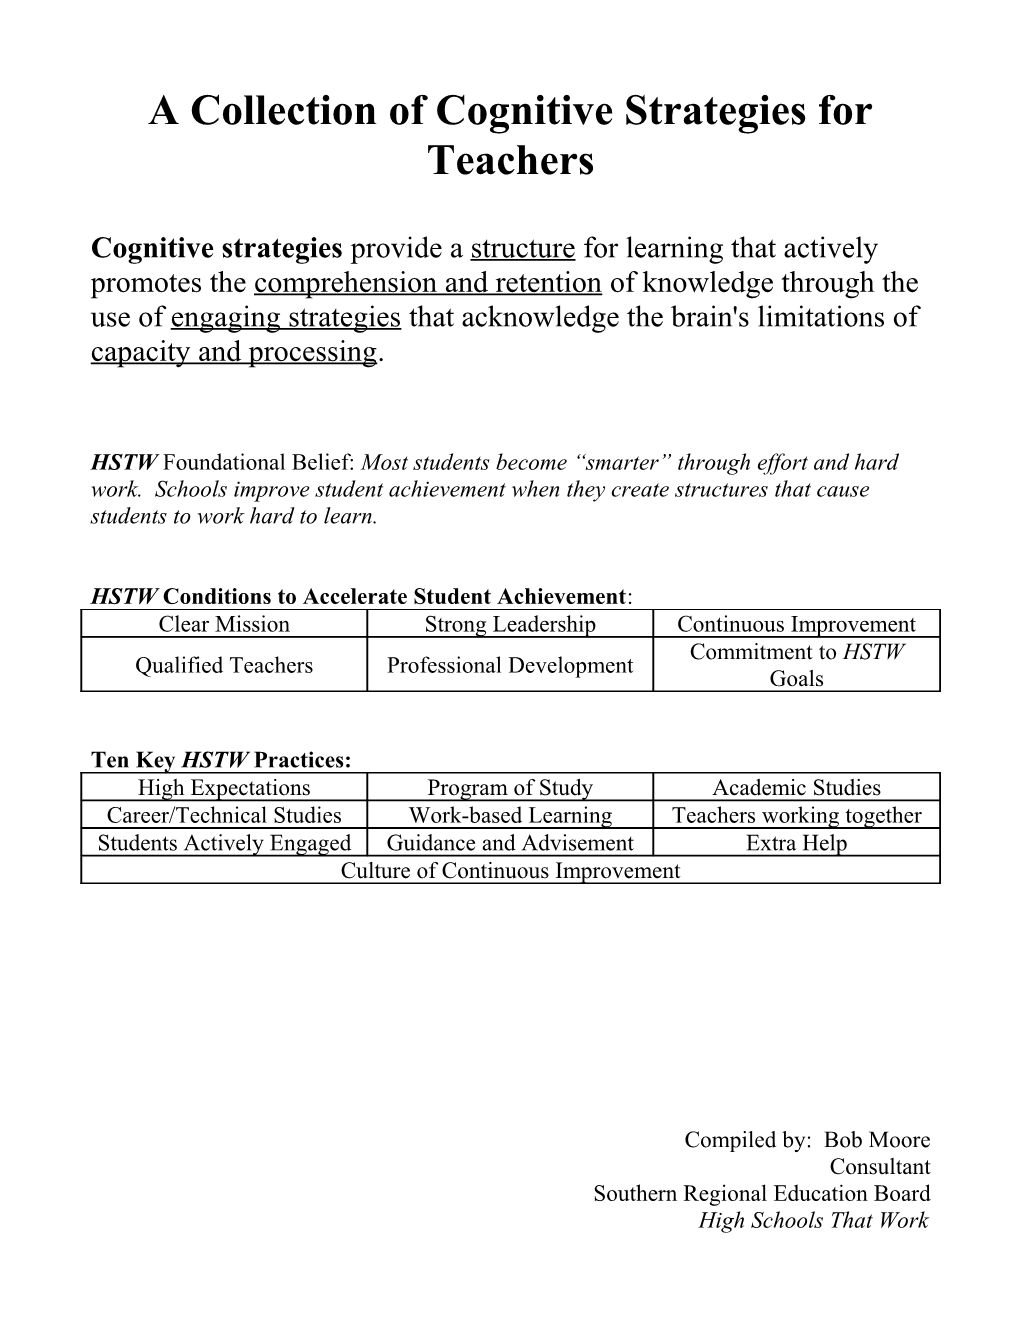 A Collection of Cognitive Strategies for Teachers